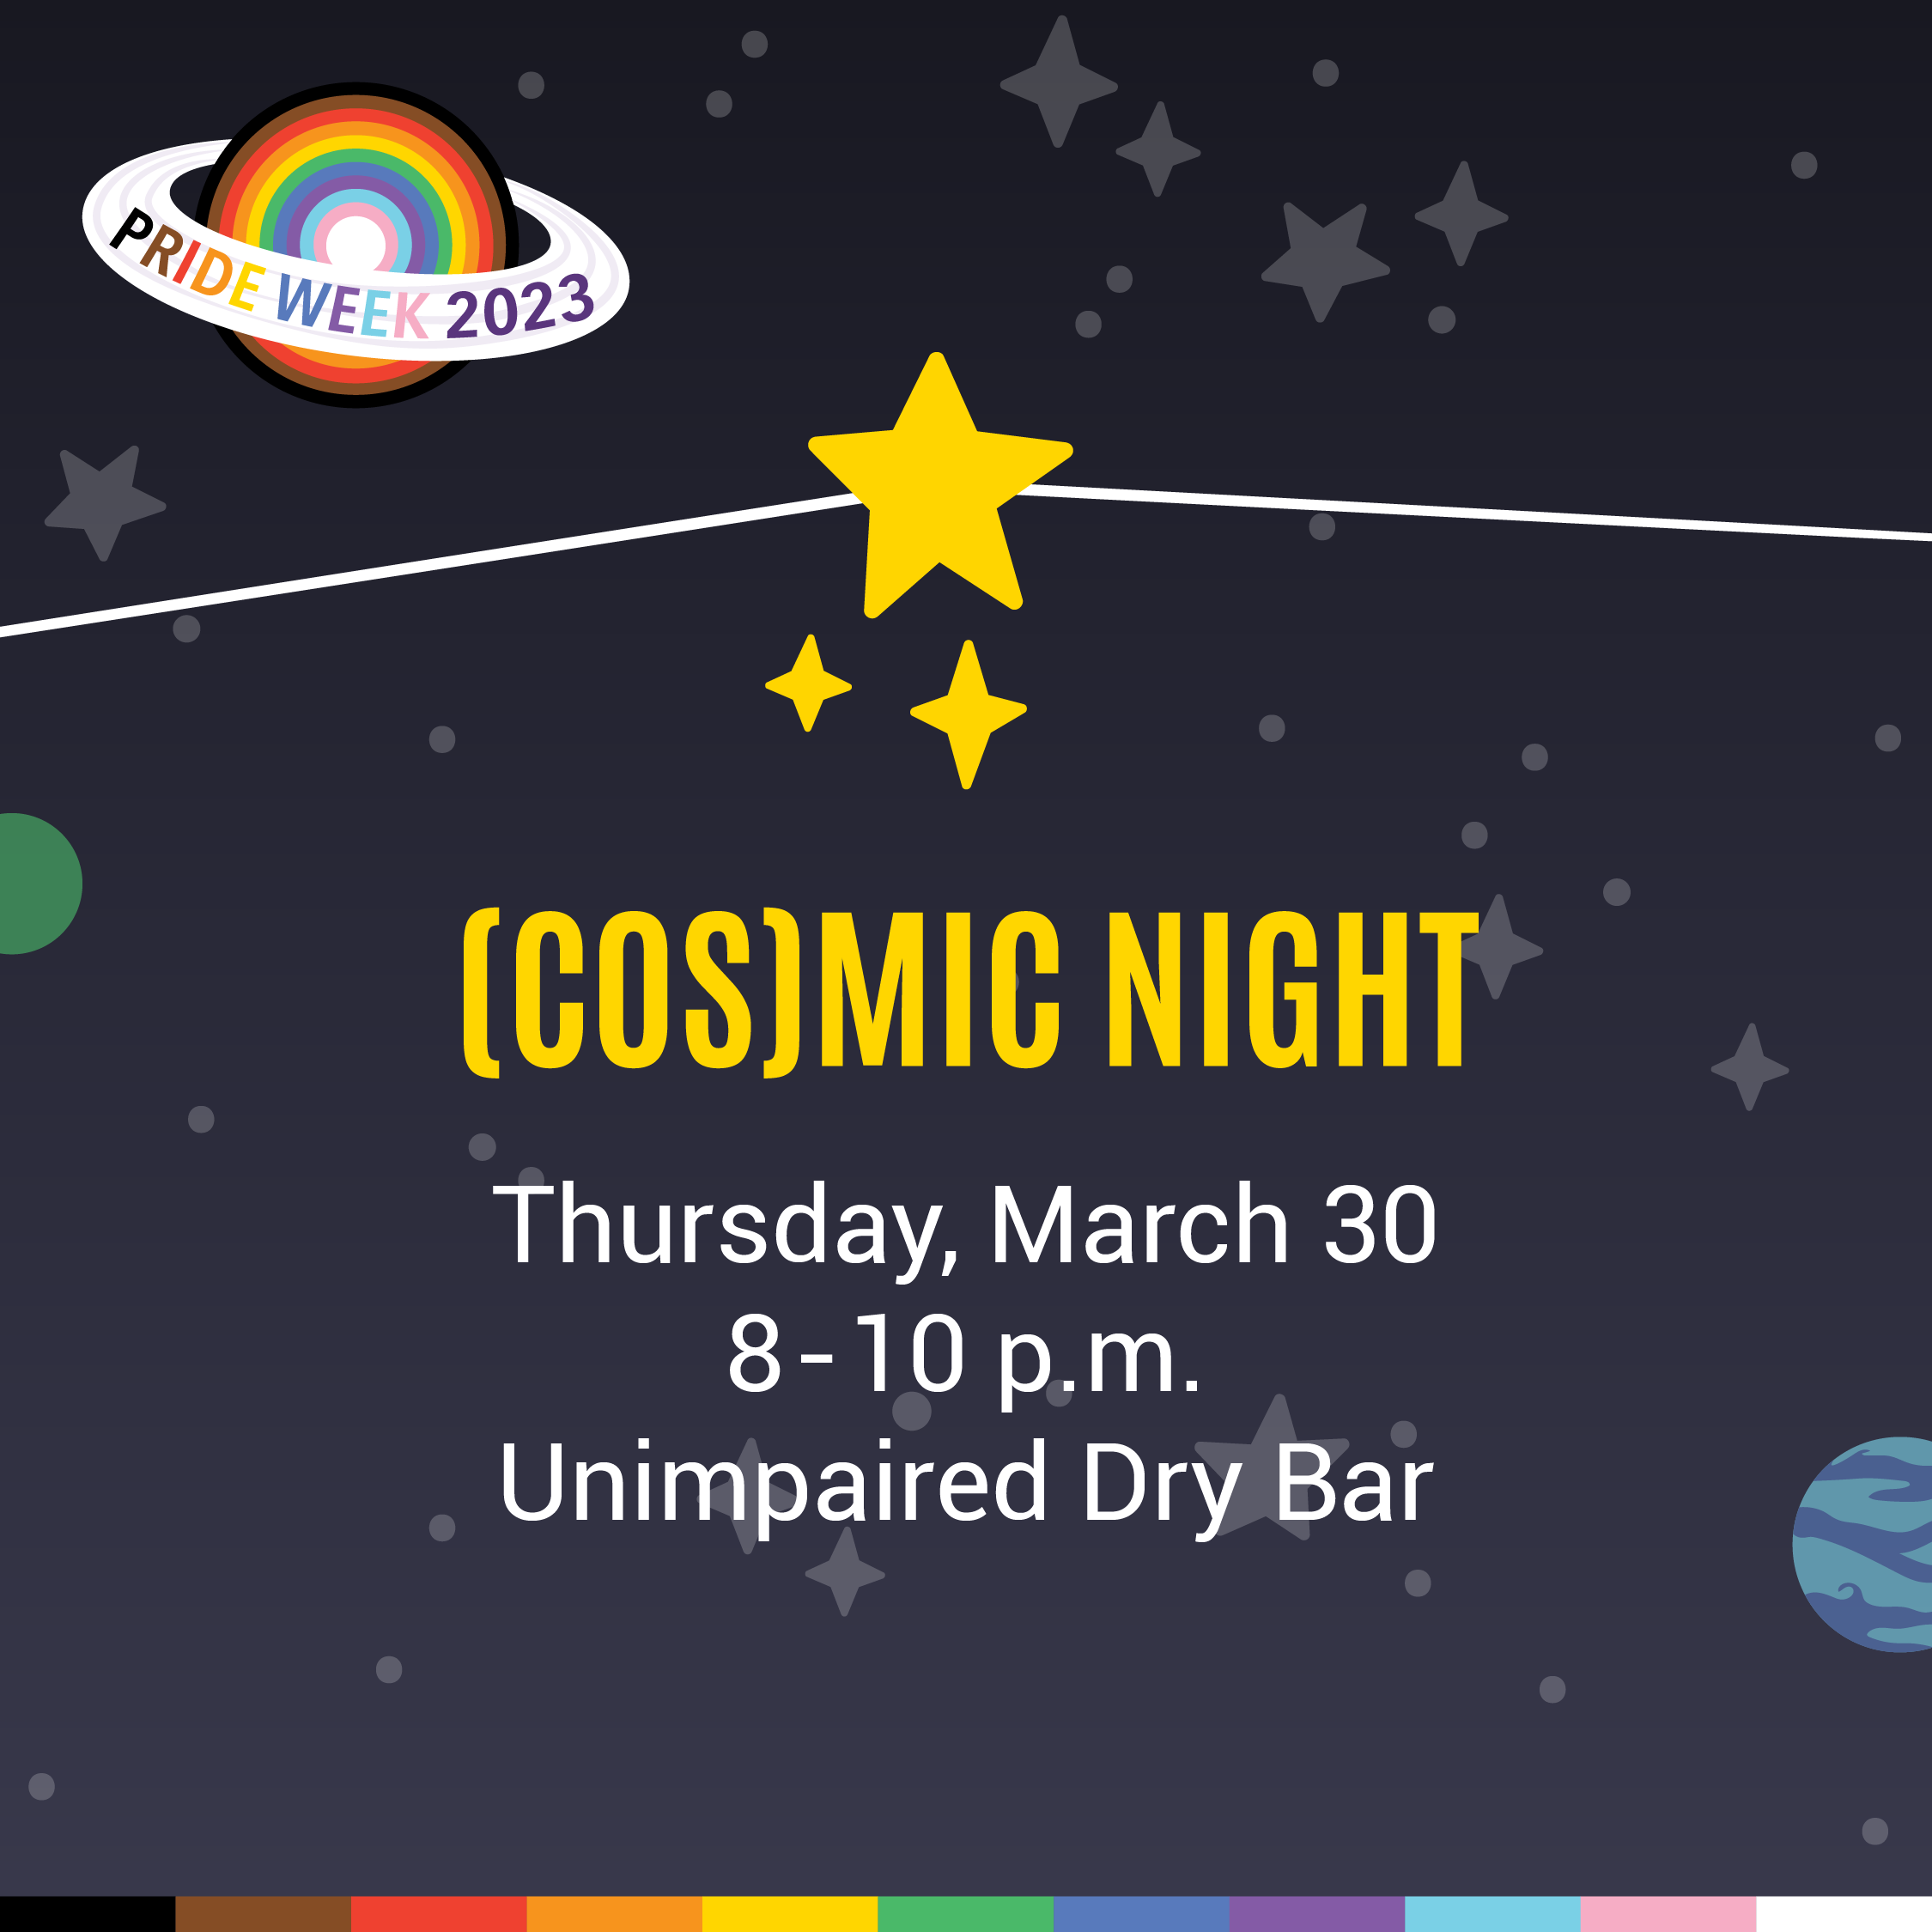 Starry background with the Pride Week logo in the top left corner of the image. Event details are written in yellow and white text, with an inclusive rainbow banner on the bottom.